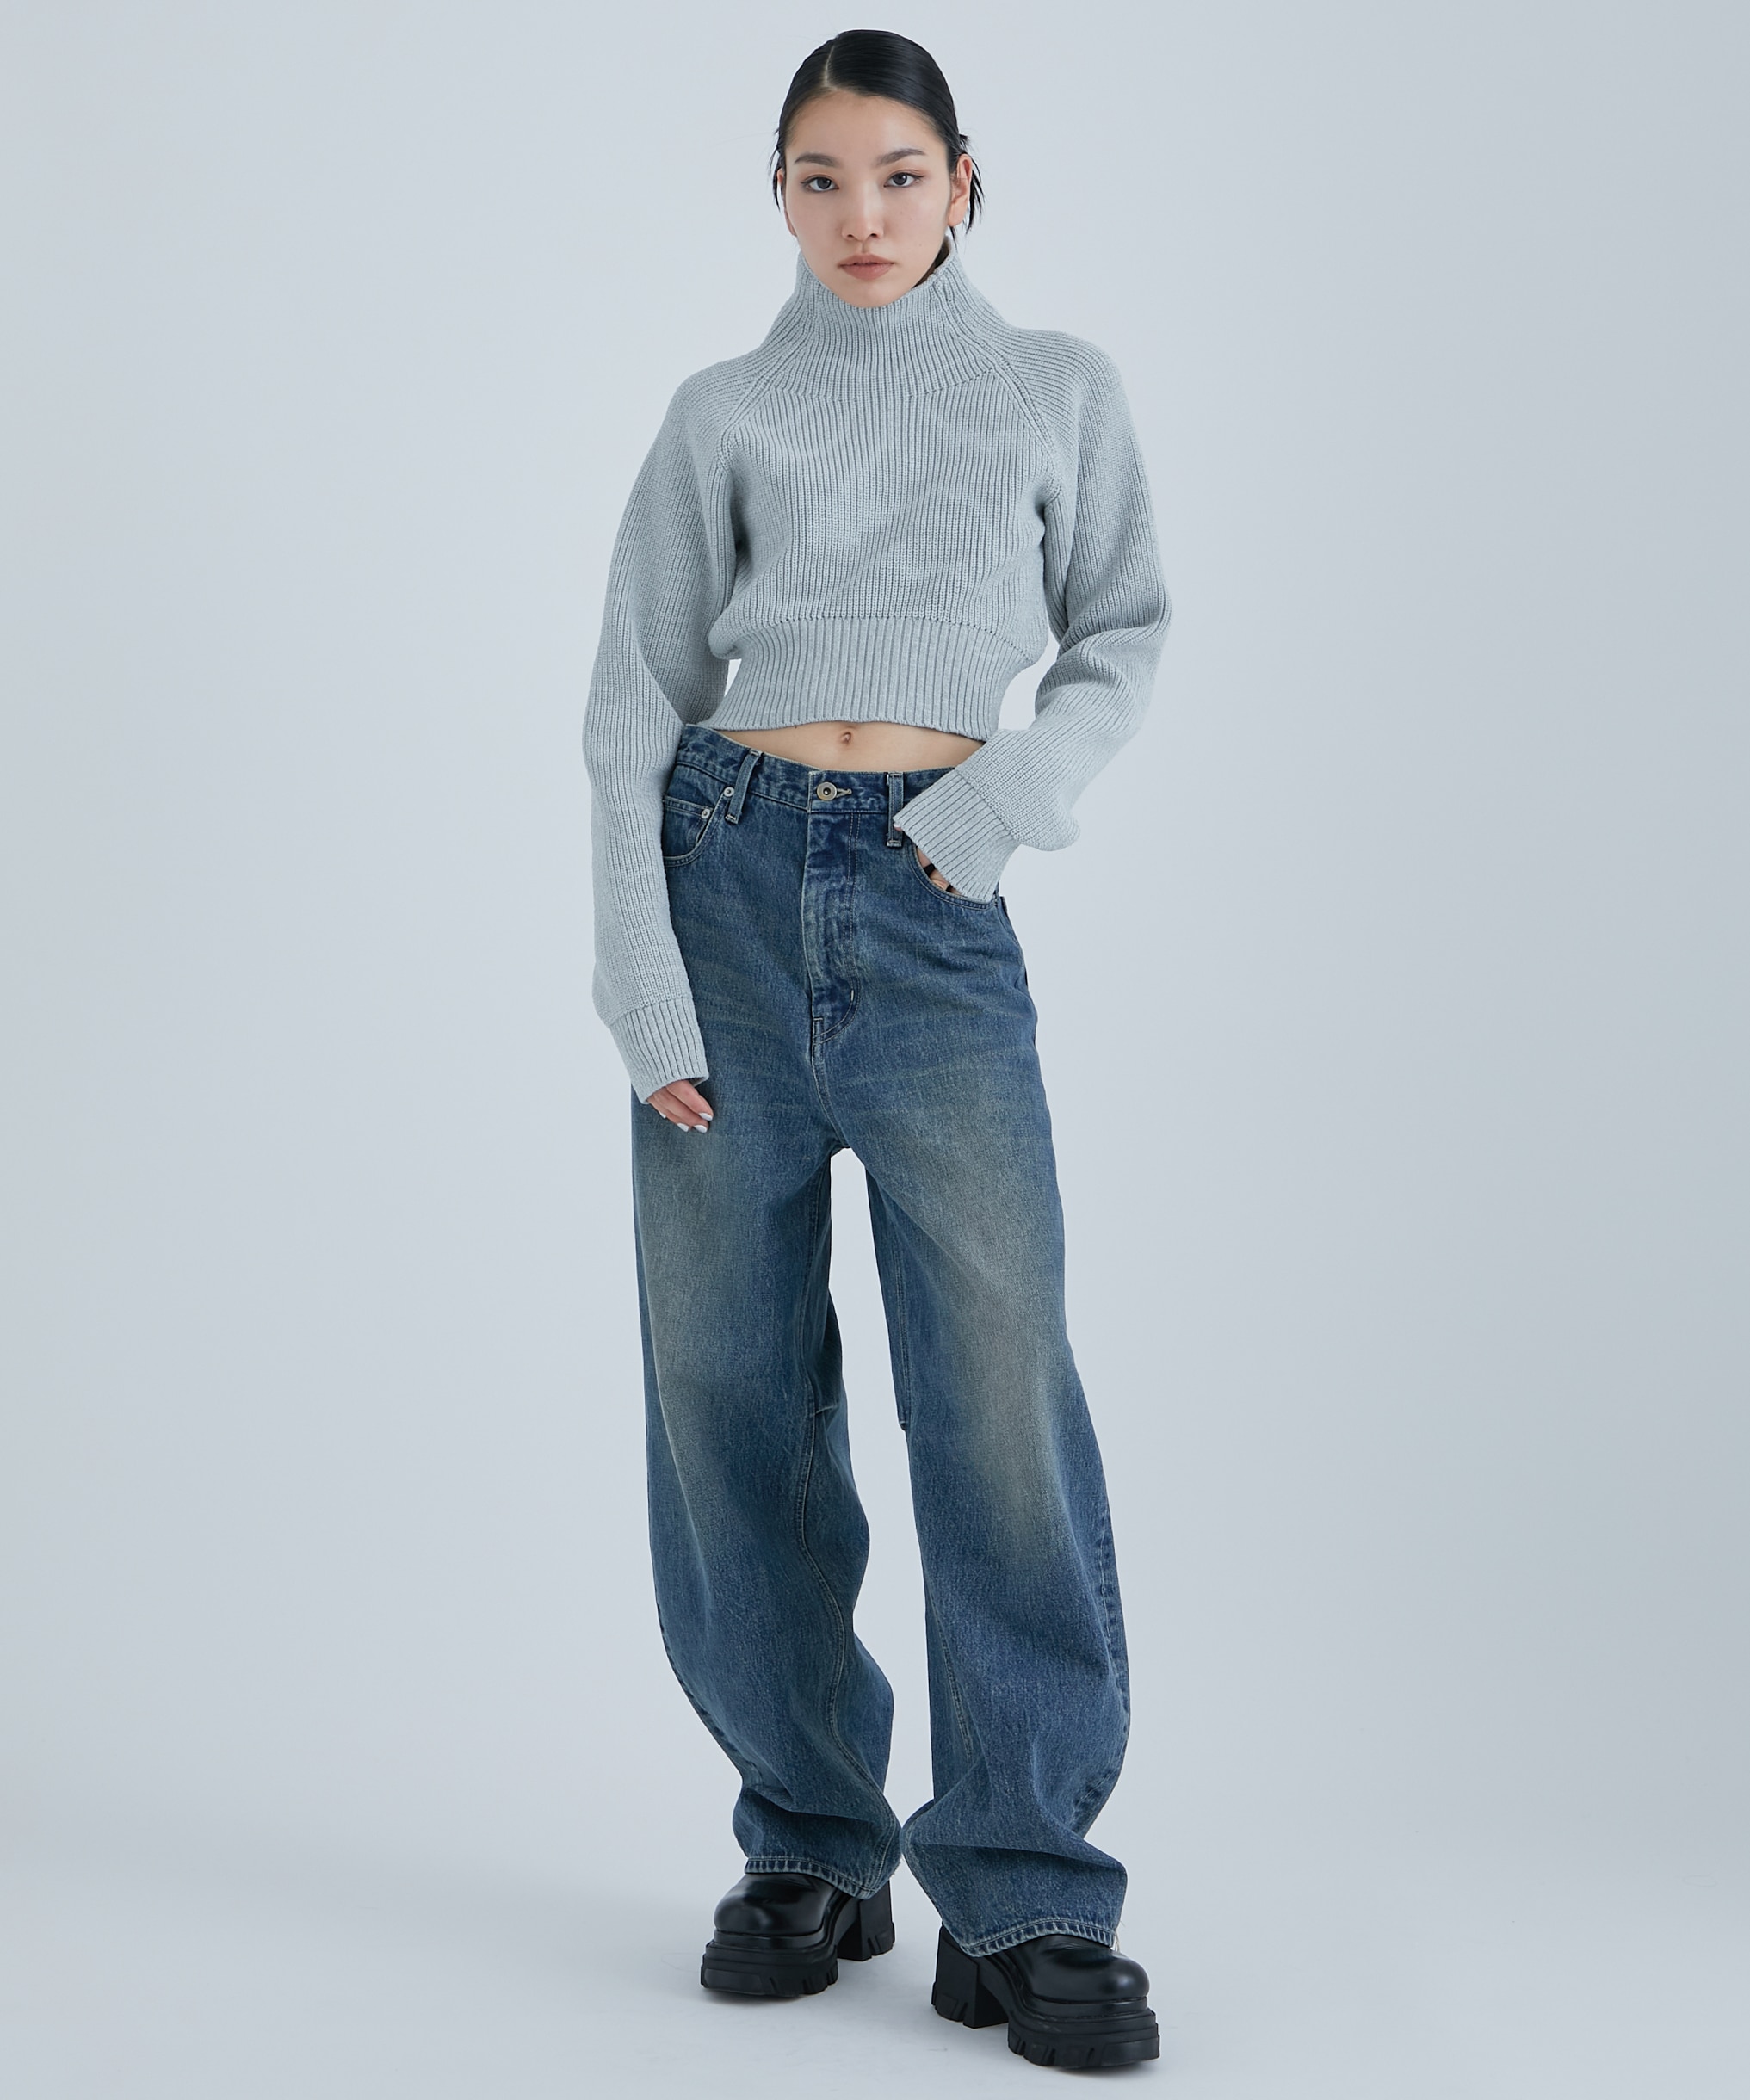 Cropped Chanky Knit Top(FREE LIGHT GREY): STUDIOUS: WOMENS 